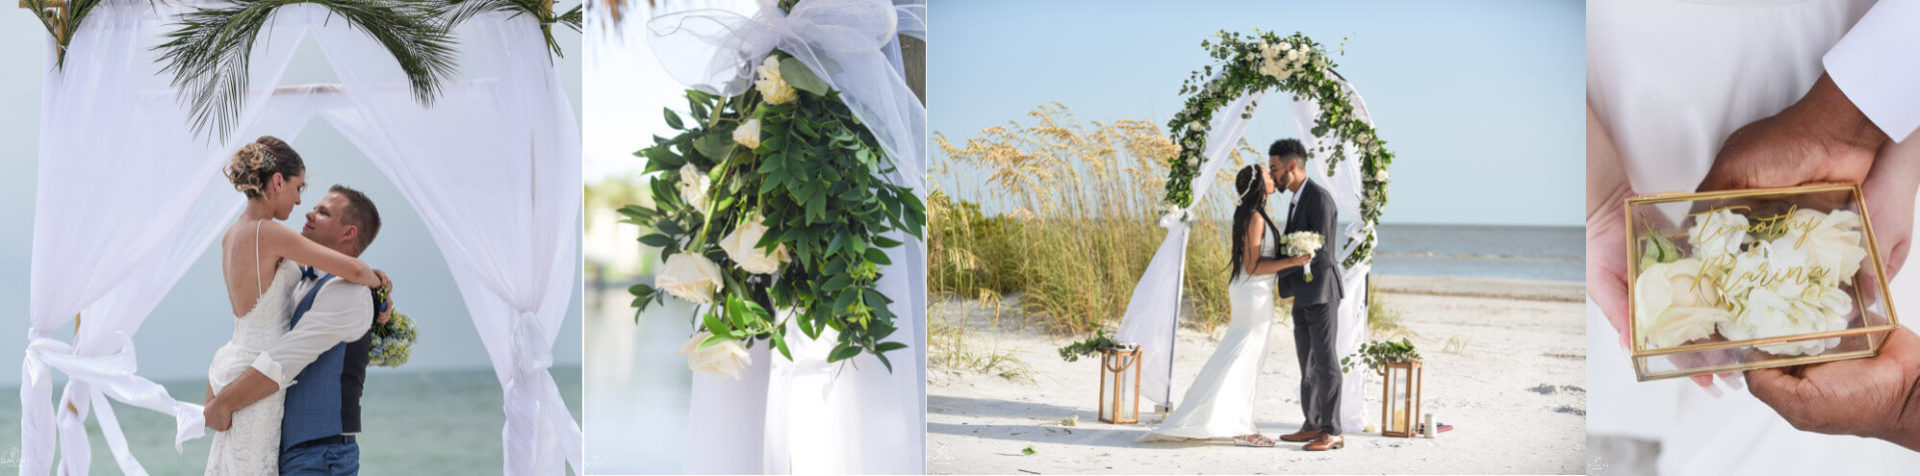 Lifestyle wedding packages collage of wedding impressions